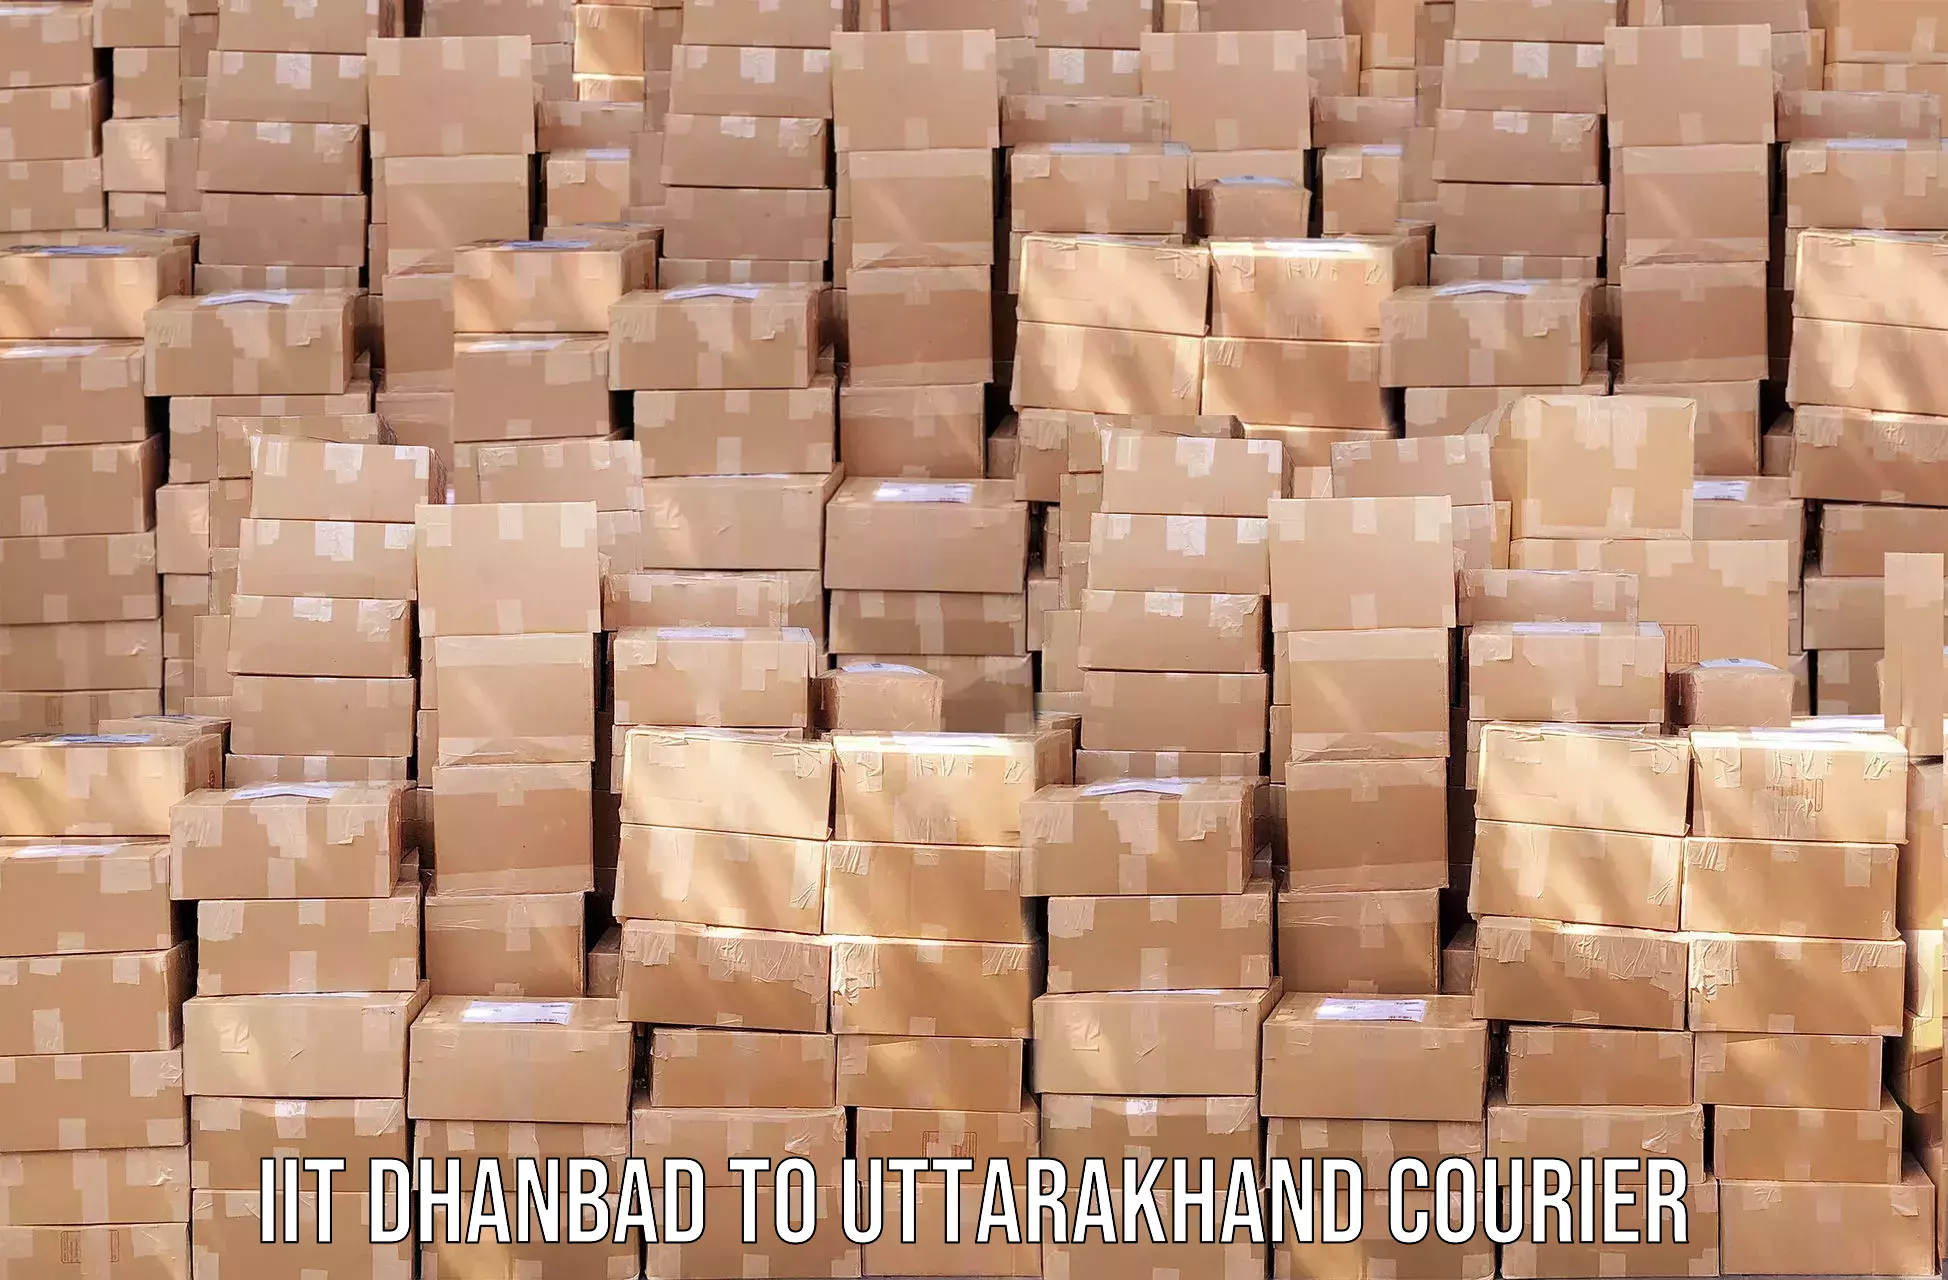 Personal parcel delivery IIT Dhanbad to Haridwar